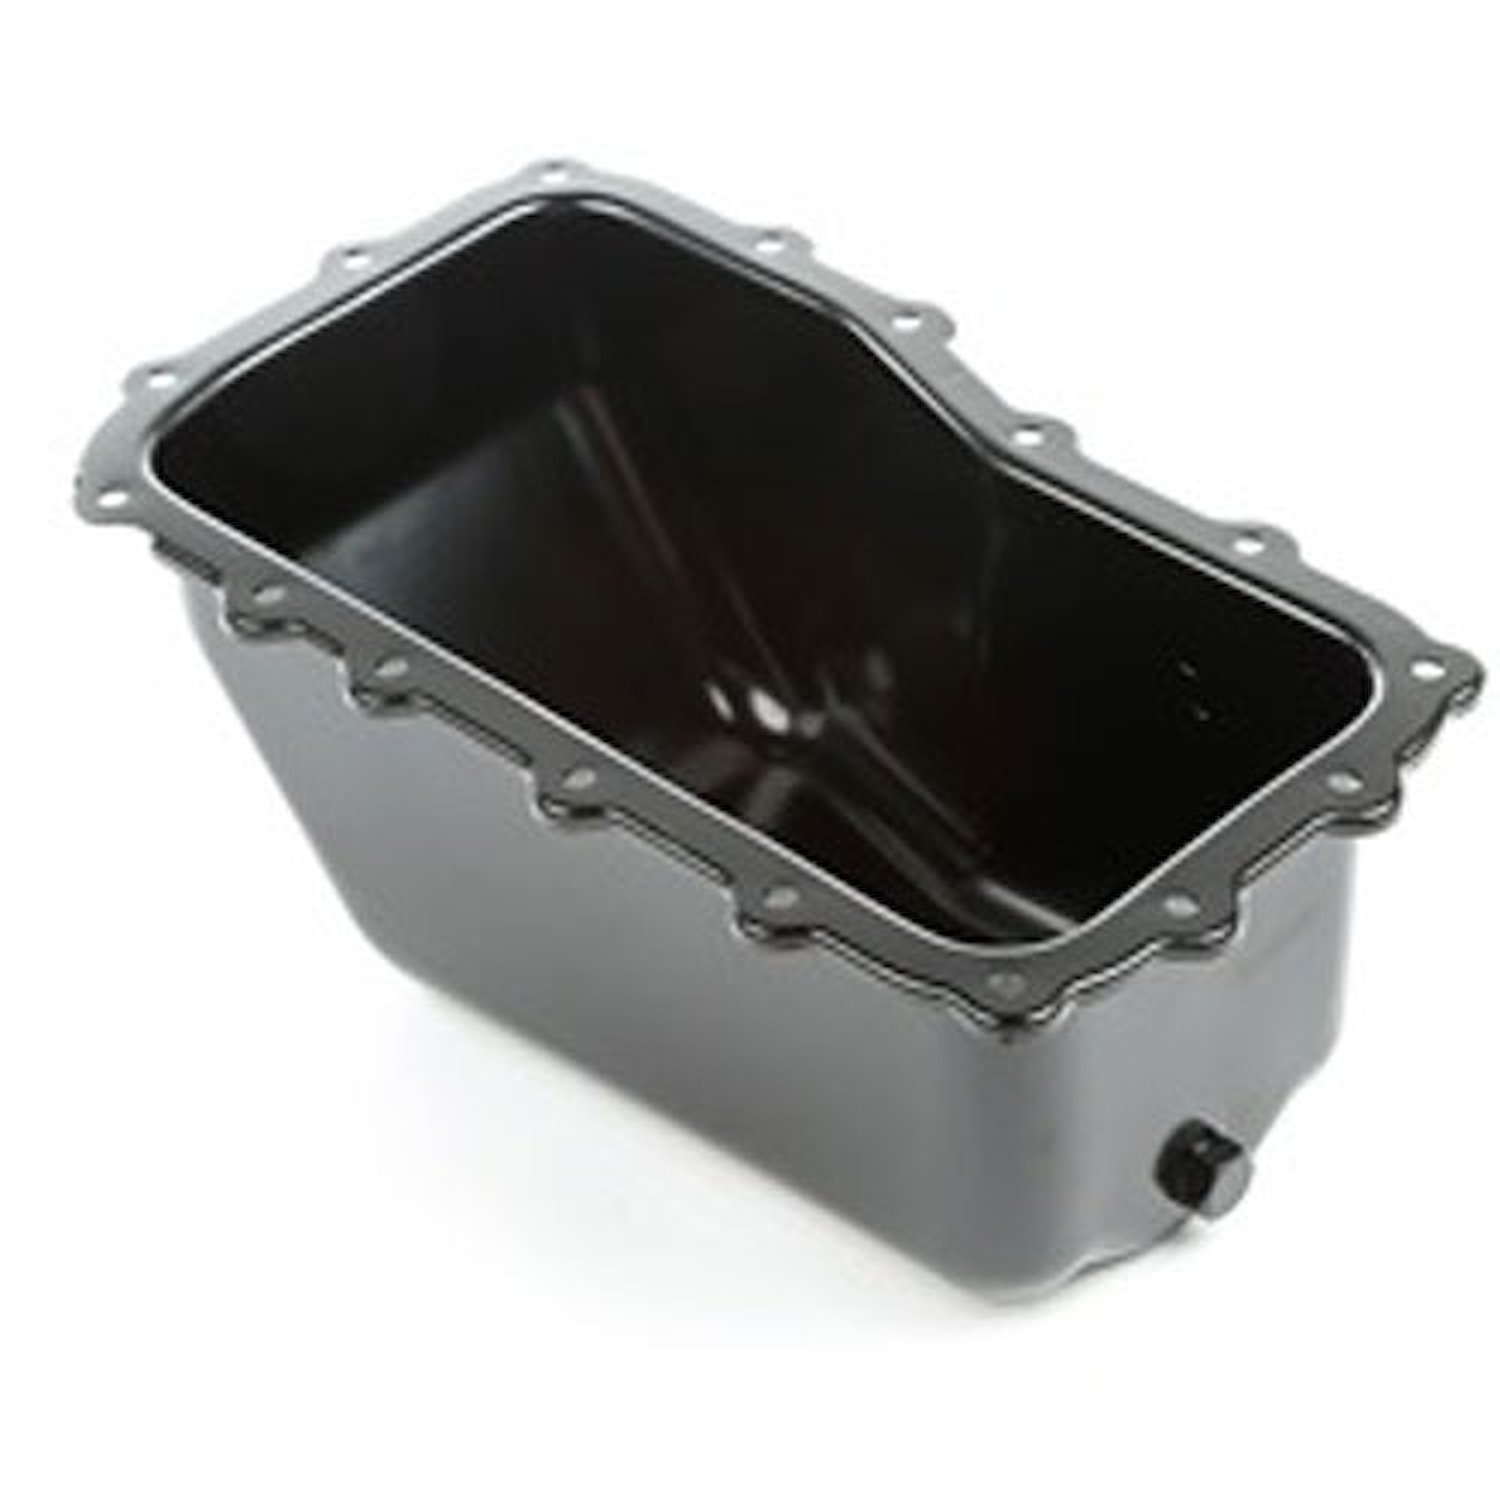 Replacement oil pan from Omix-ADA, Fits 3.8L engine used in 07-11 Jeep Wranglers.